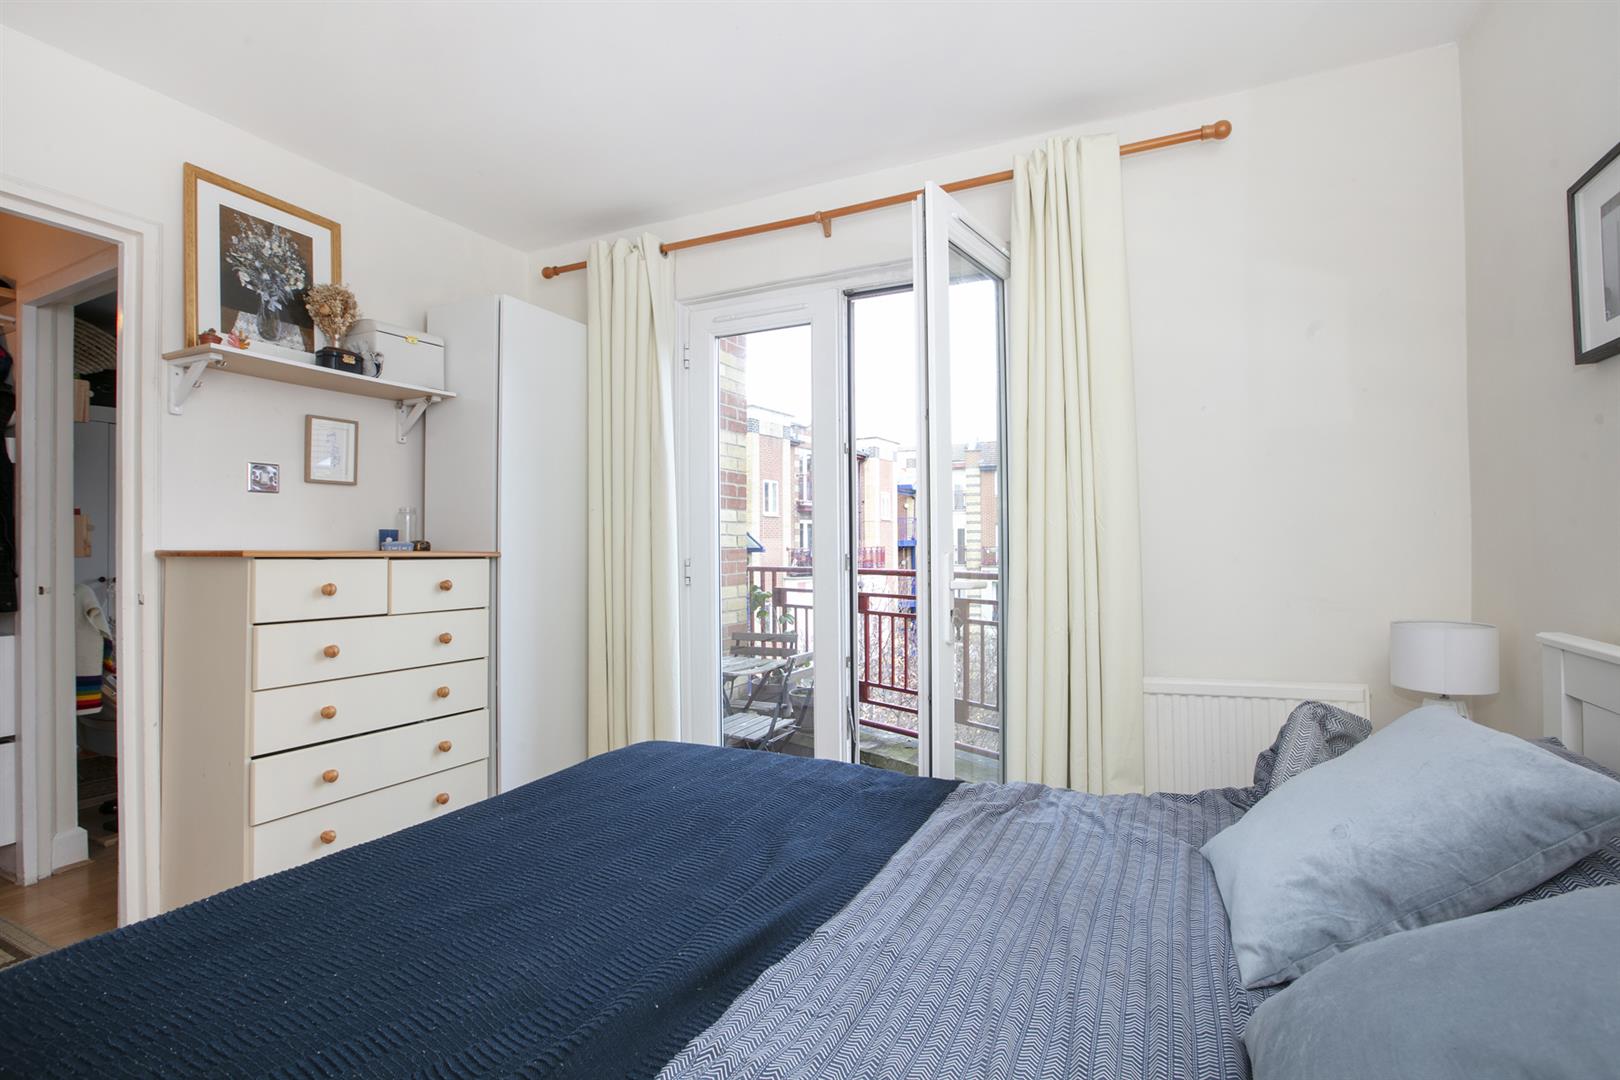 Flat - Purpose Built Sale Agreed in Hopewell Street, Camberwell, SE5 890 view12